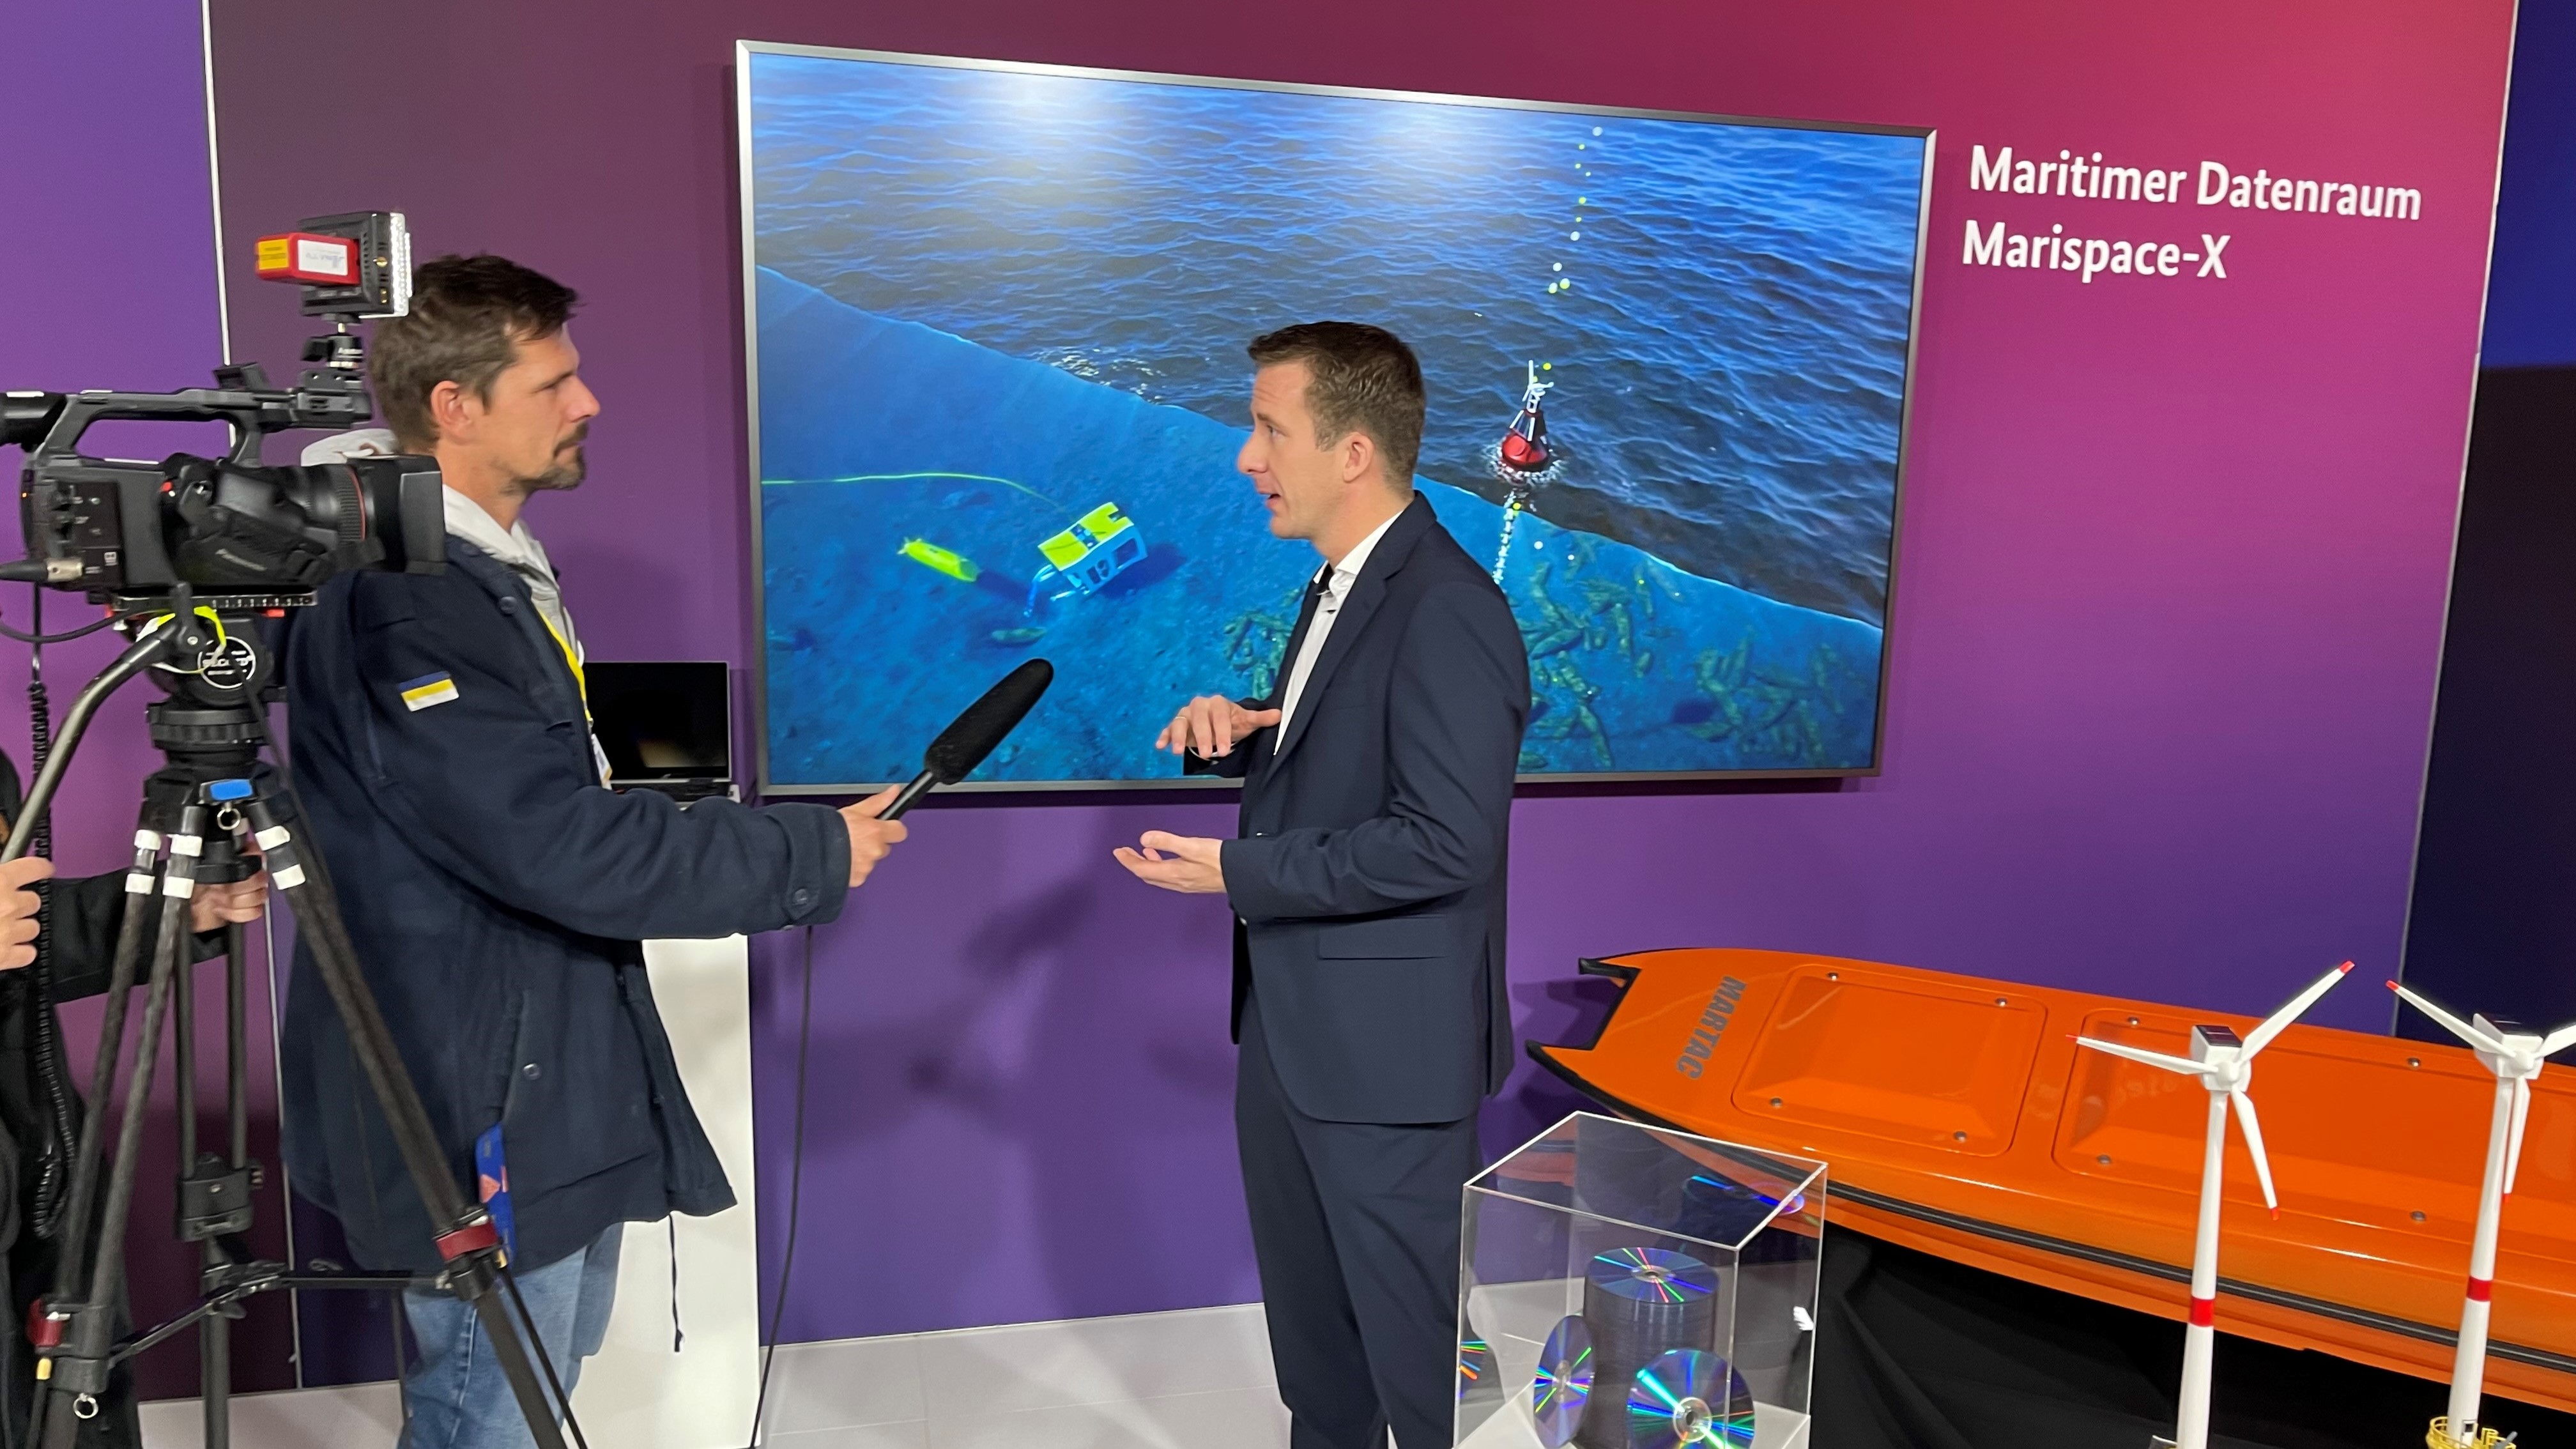 north.io CEO to present Maritime Data Space project to Chancellor Scholz at Digital Summit